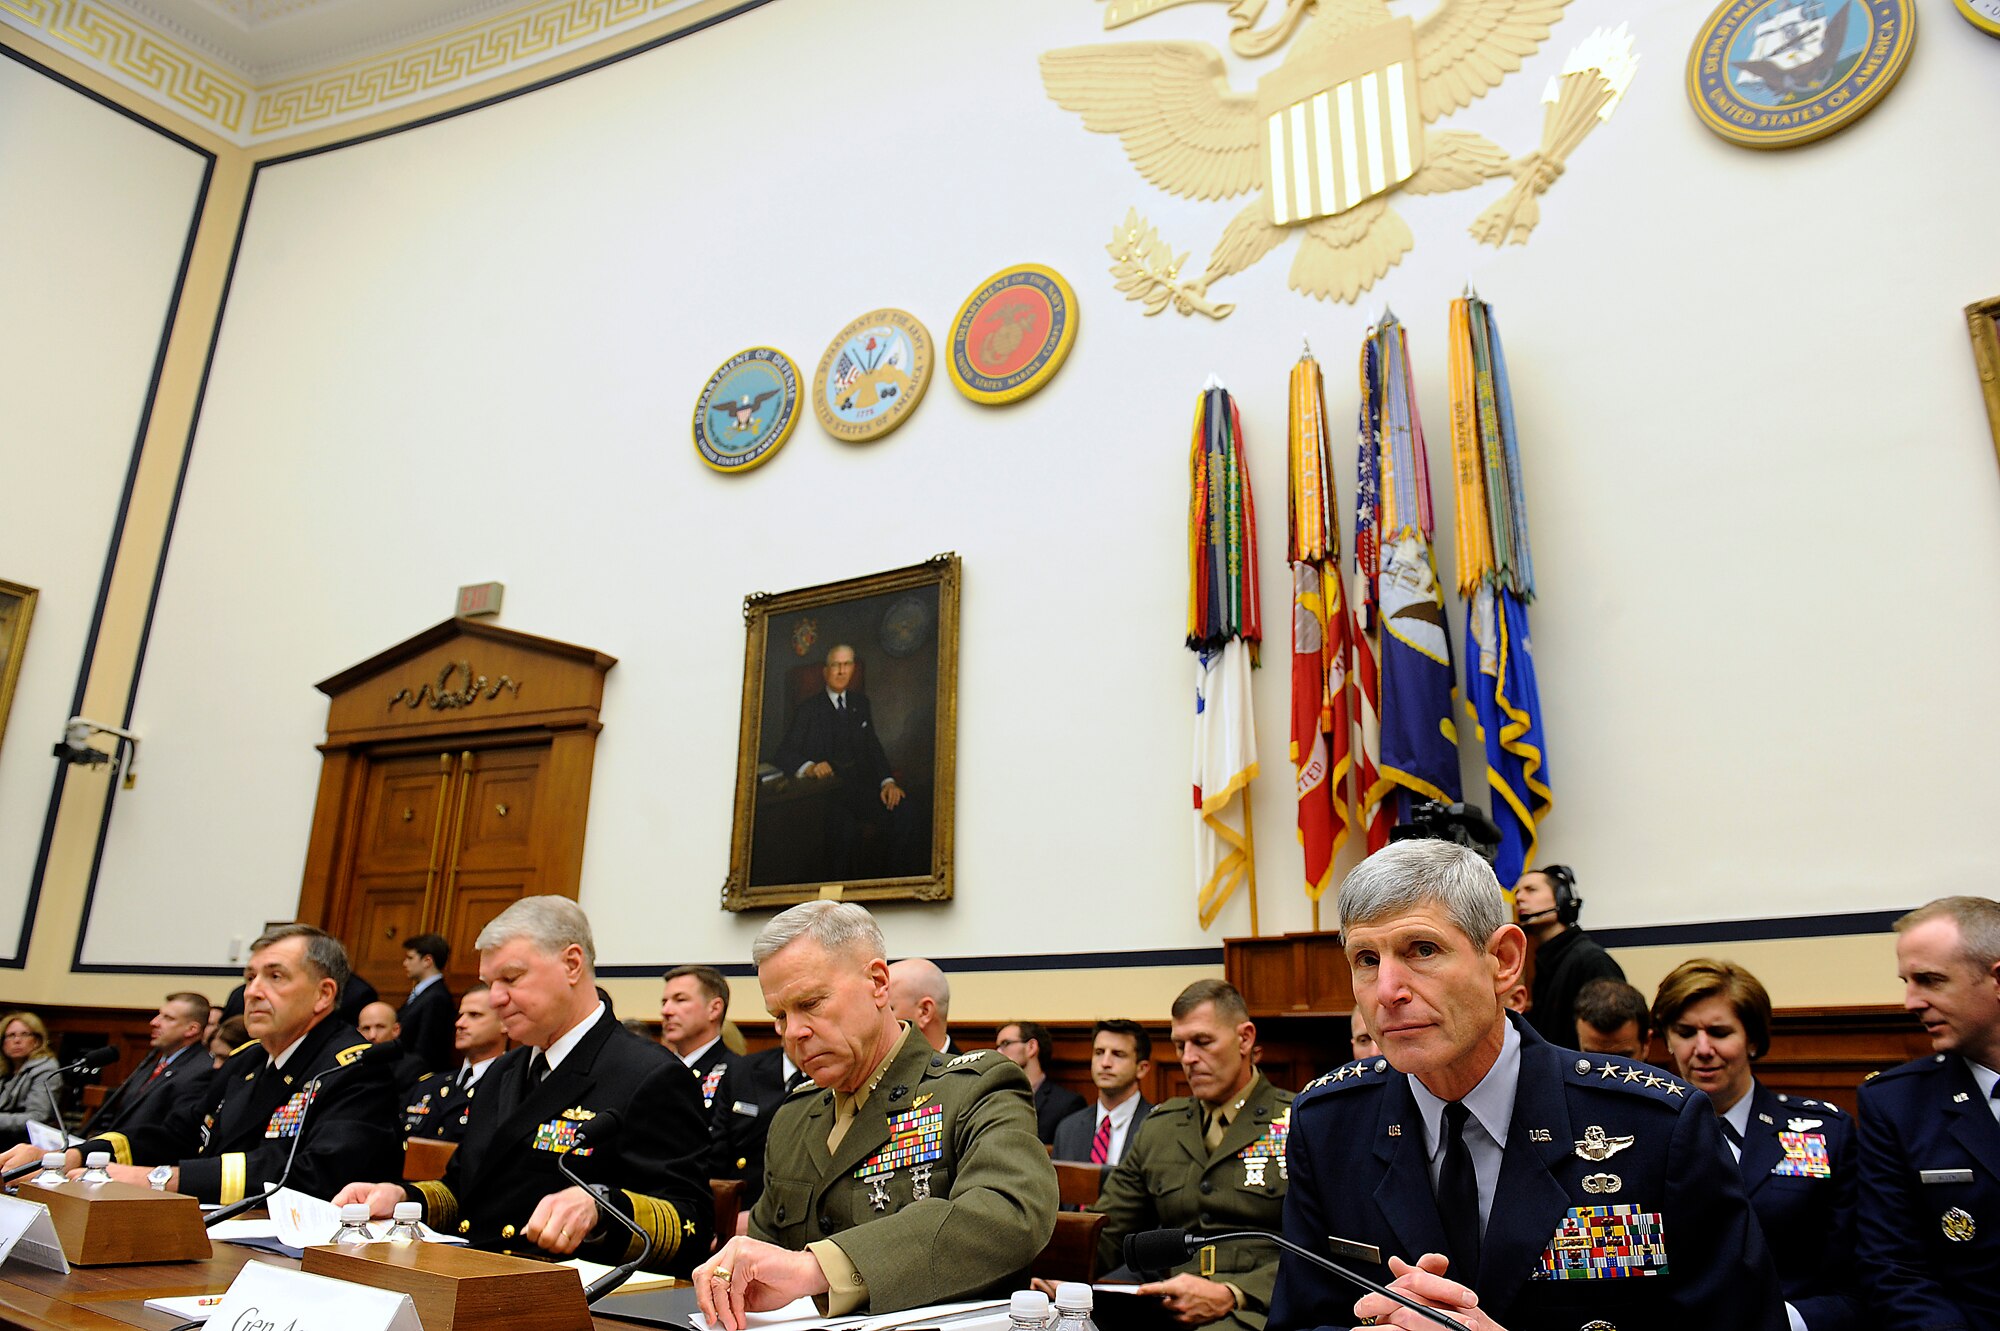 Air Force Chief of Staff Gen. Norton Schwartz (right) prepares to testify before the House Armed Services Committee in Washington, D.C., on April 7, 2011.  General Schwartz was joined by (left to right) Army Vice Chief of Staff Gen. Peter Chiarelli, Chief of Naval Operations Adm. Gary Roughead, and Marine Corps Commandant Gen. James Amos.  (U.S. Air Force photo/Scott M. Ash)
